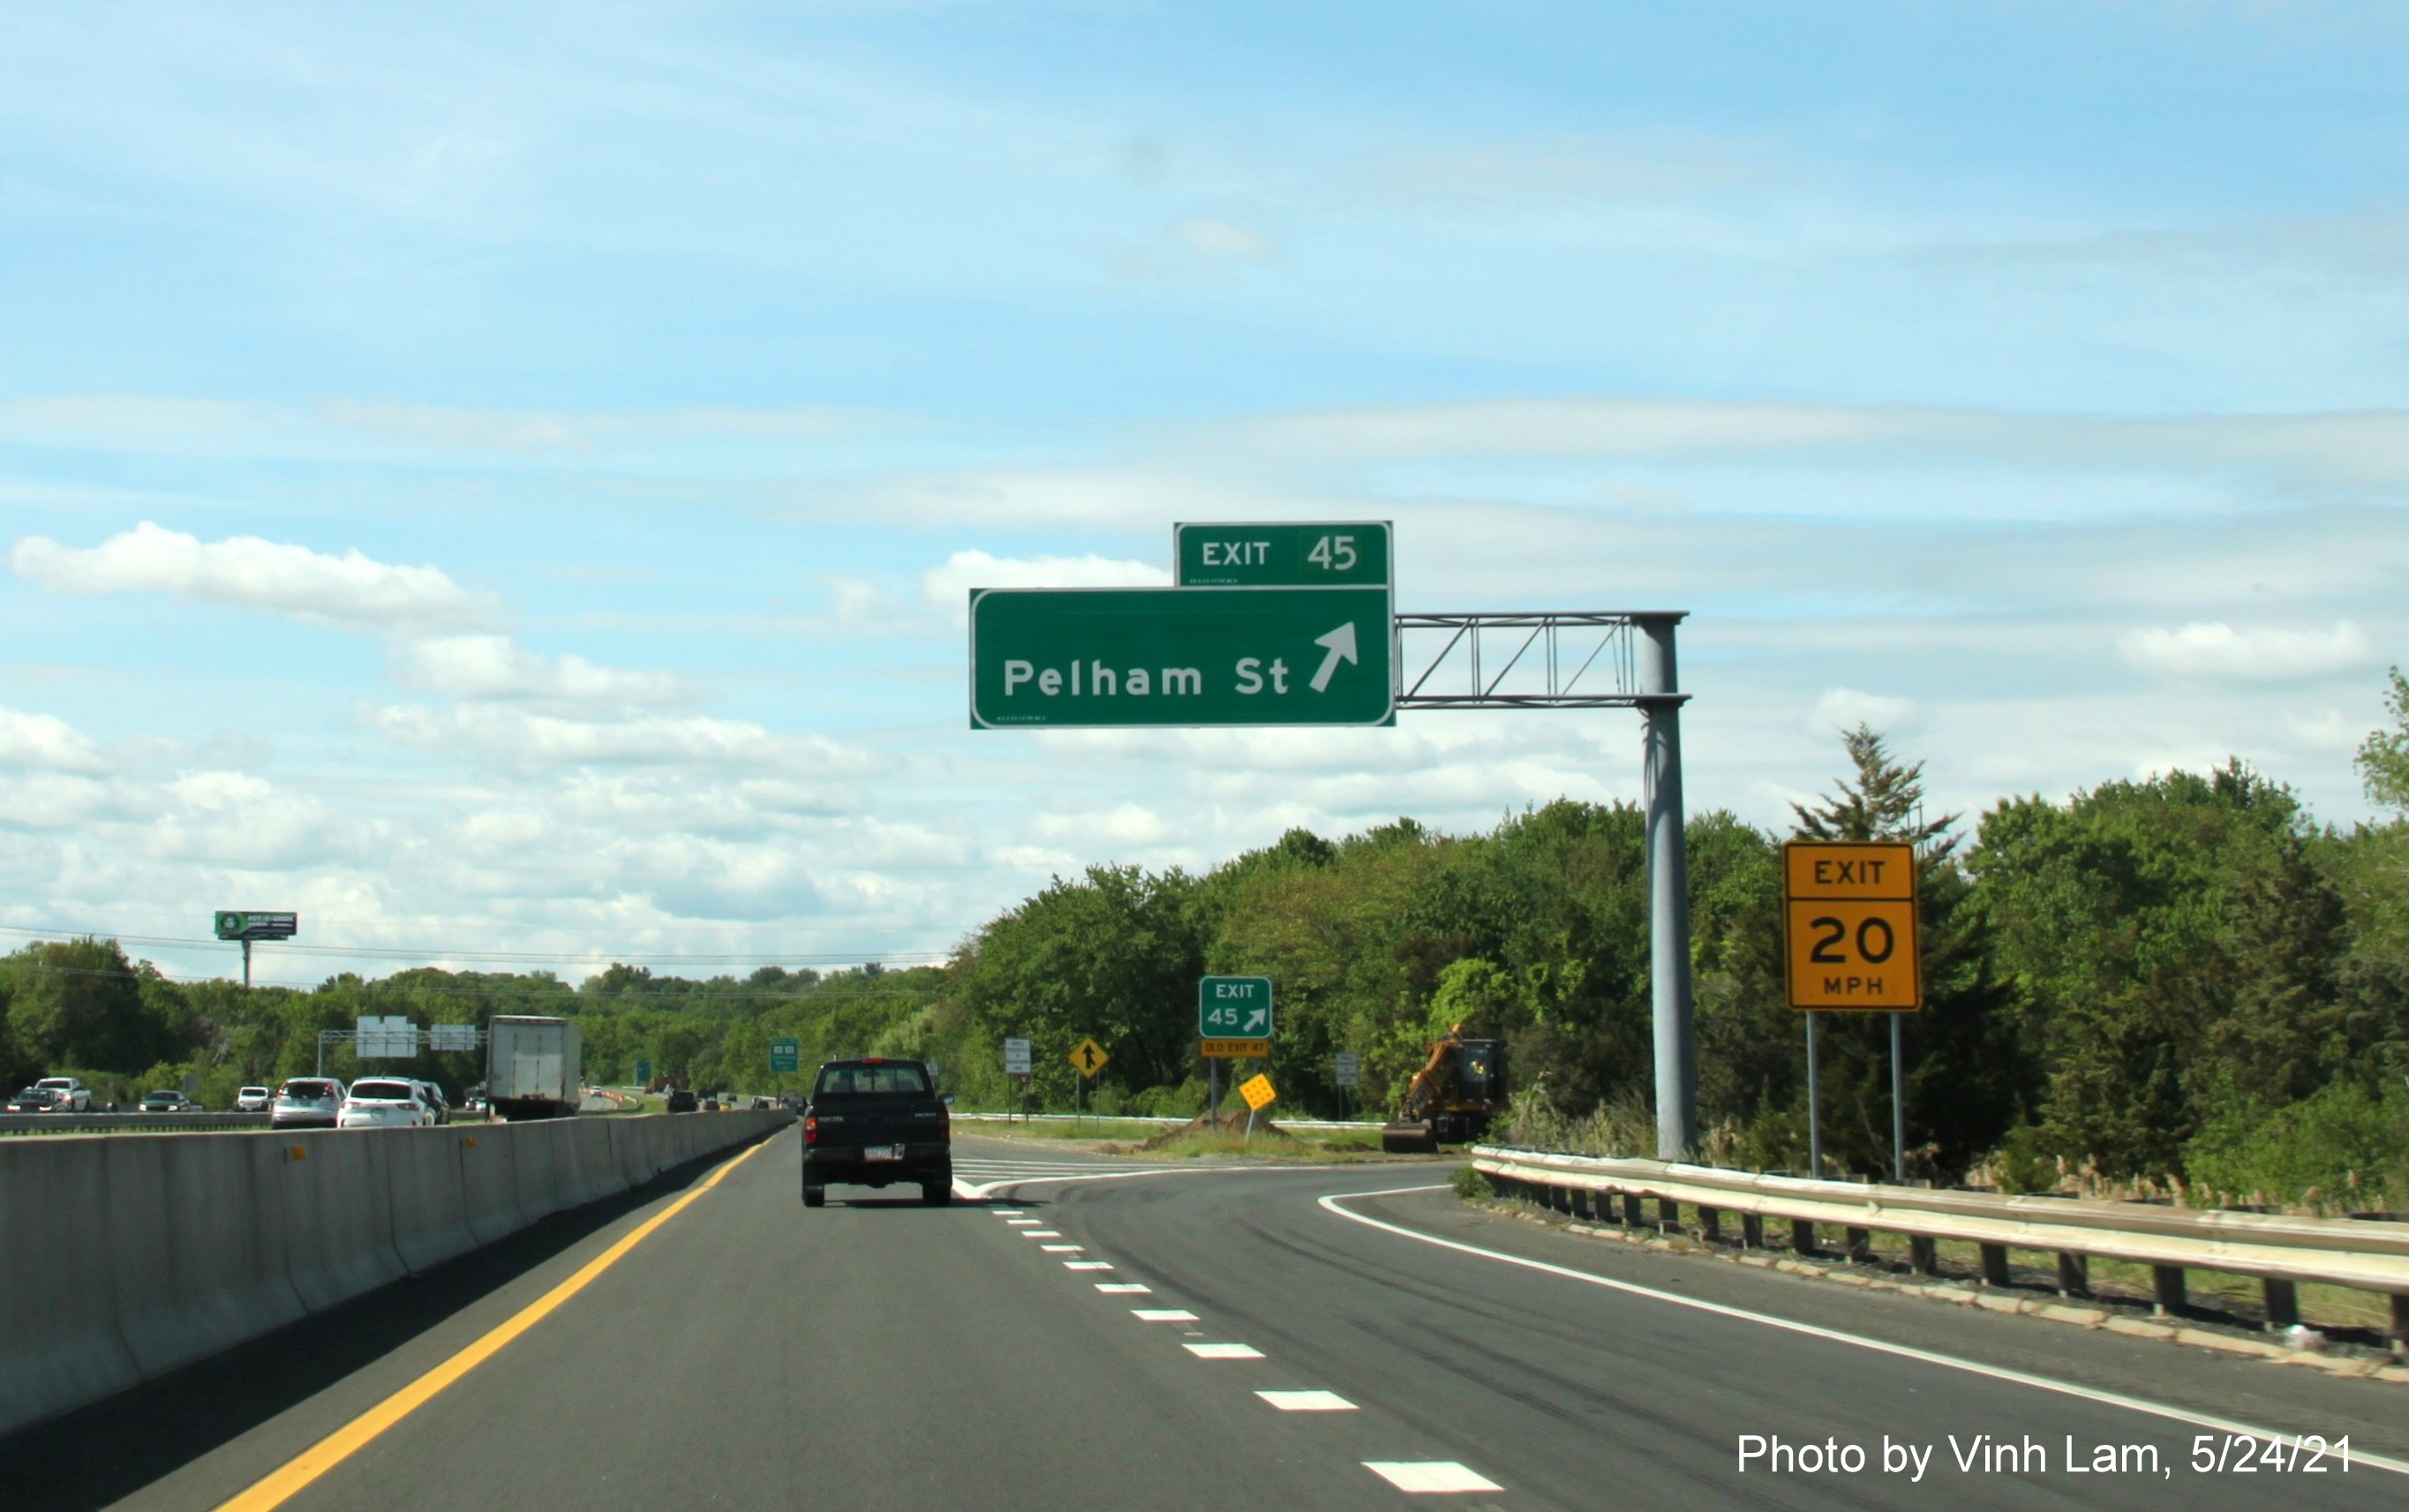 Image of overhead ramp sign for Pelham Road exit with new milepost based exit number on I-93 South in Methuen, by Vinh Lam, May 2021